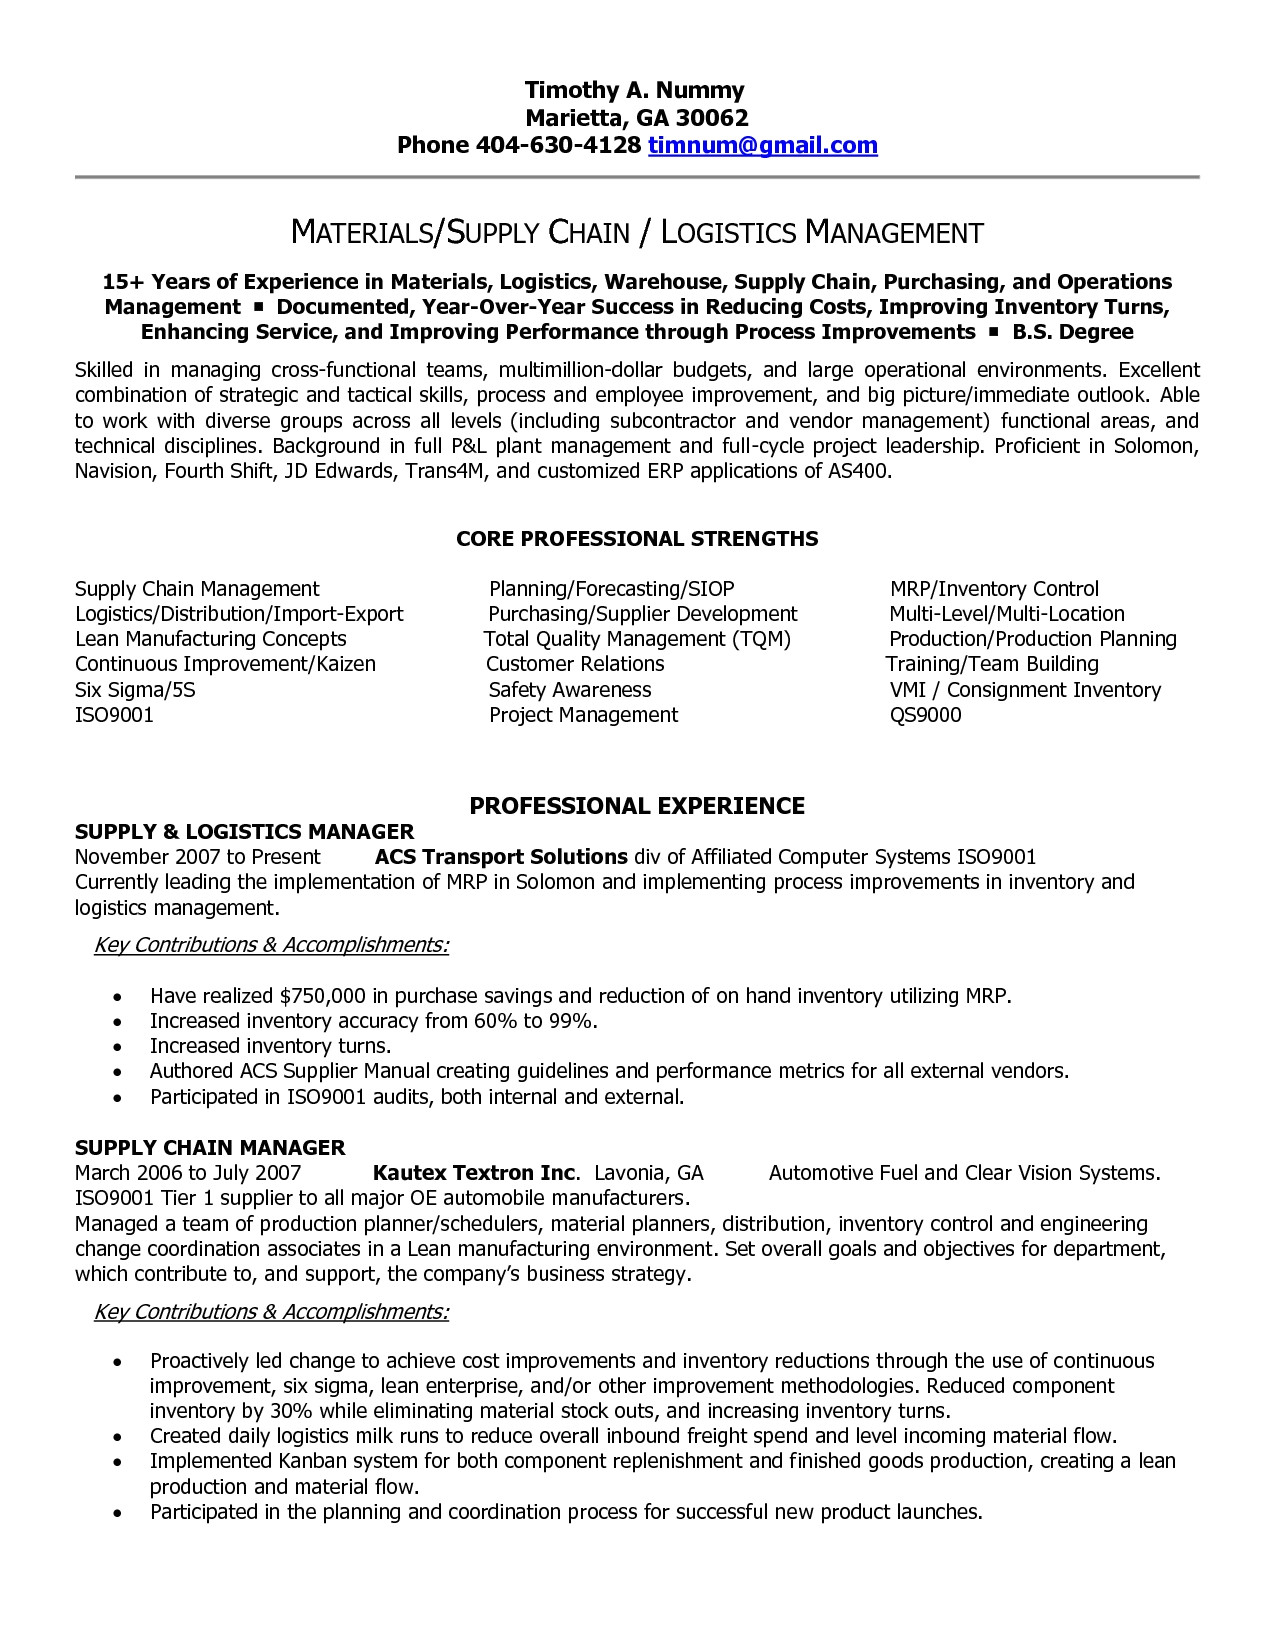 resume format for automobile industry